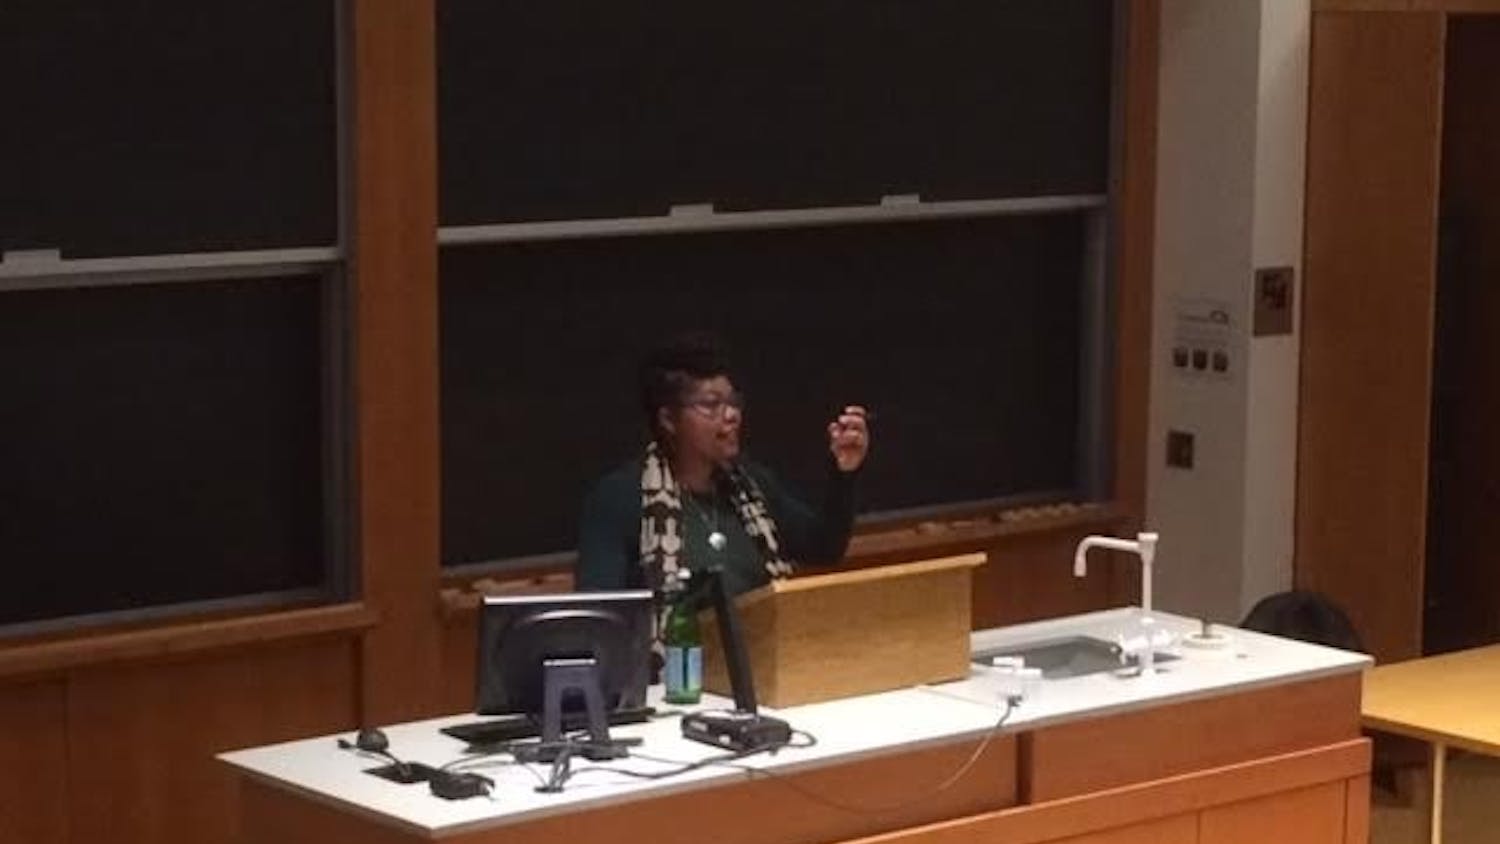 Adriane Lentz-Smith, a history professor at Duke University, gave a lecture for the Department of African, African American and Diaspora Studies’ annual student research conference on Friday.